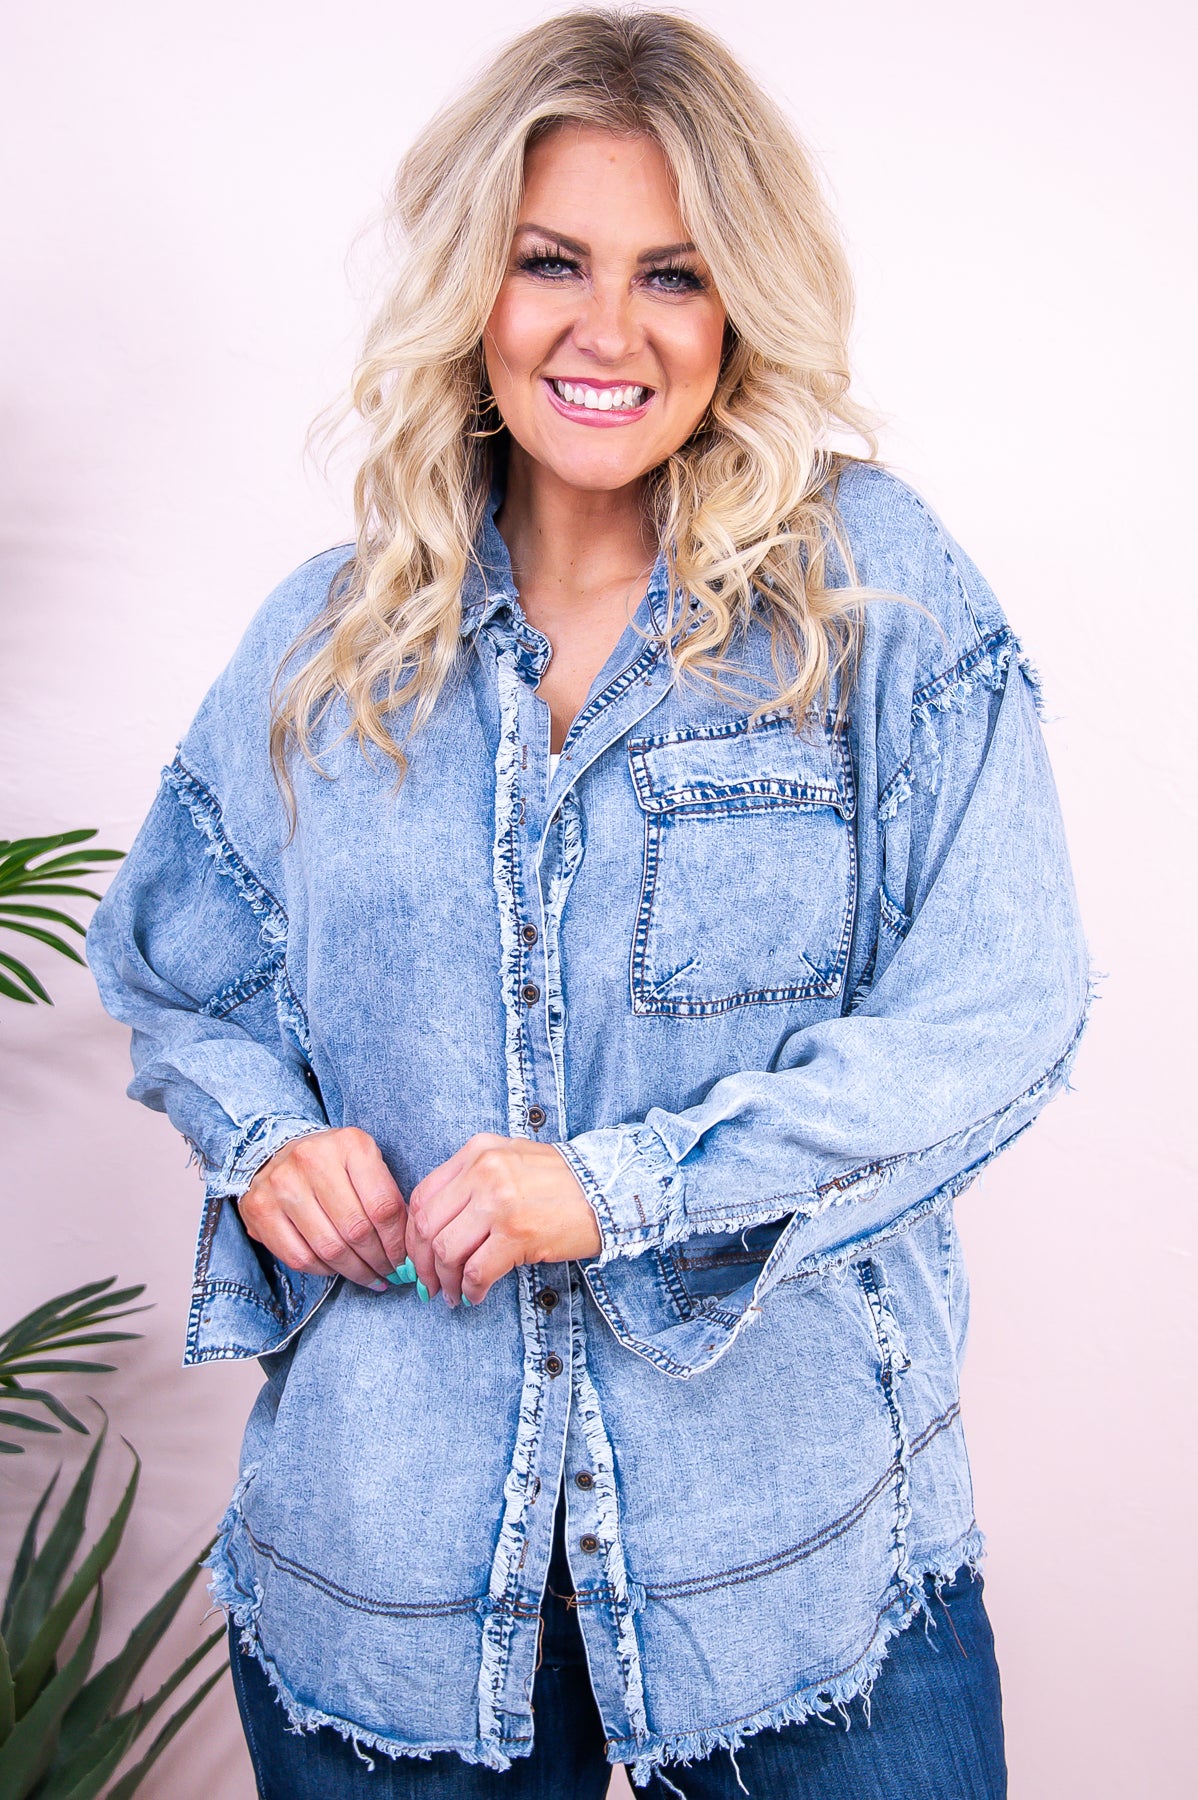 She's One Of A Kind Light Denim Solid Frayed Top - T9502LDN